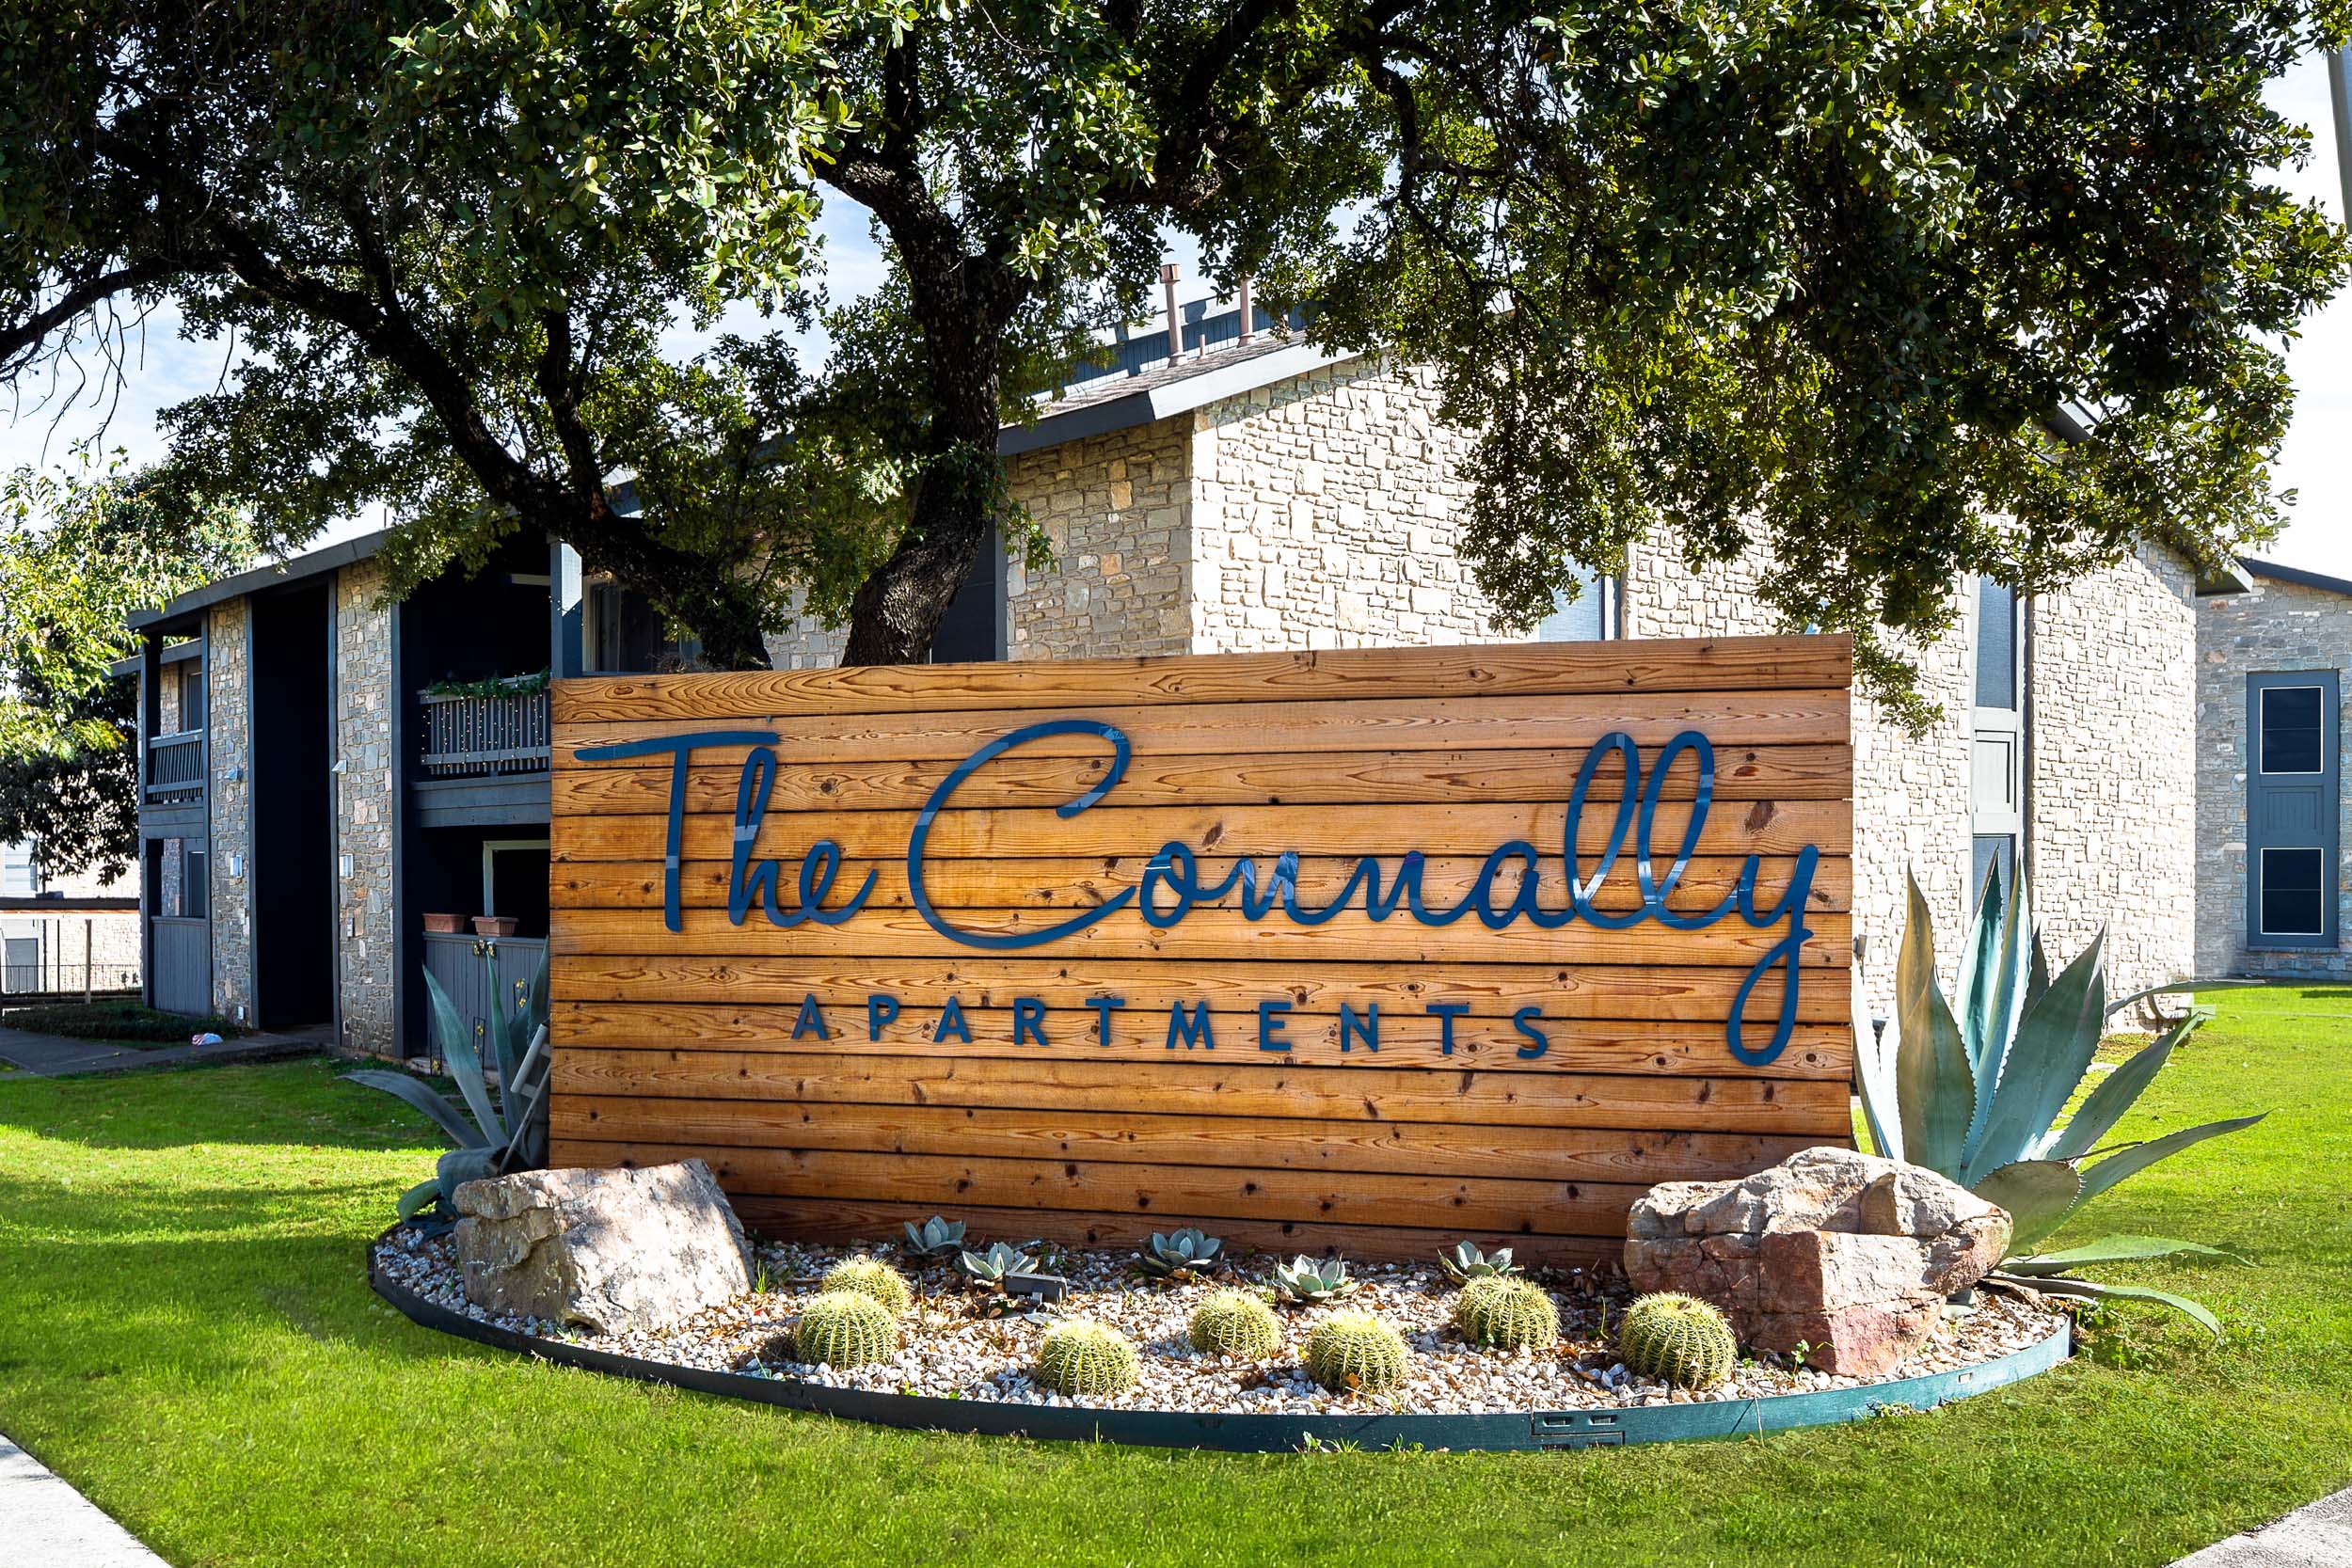 The Connally Apartments